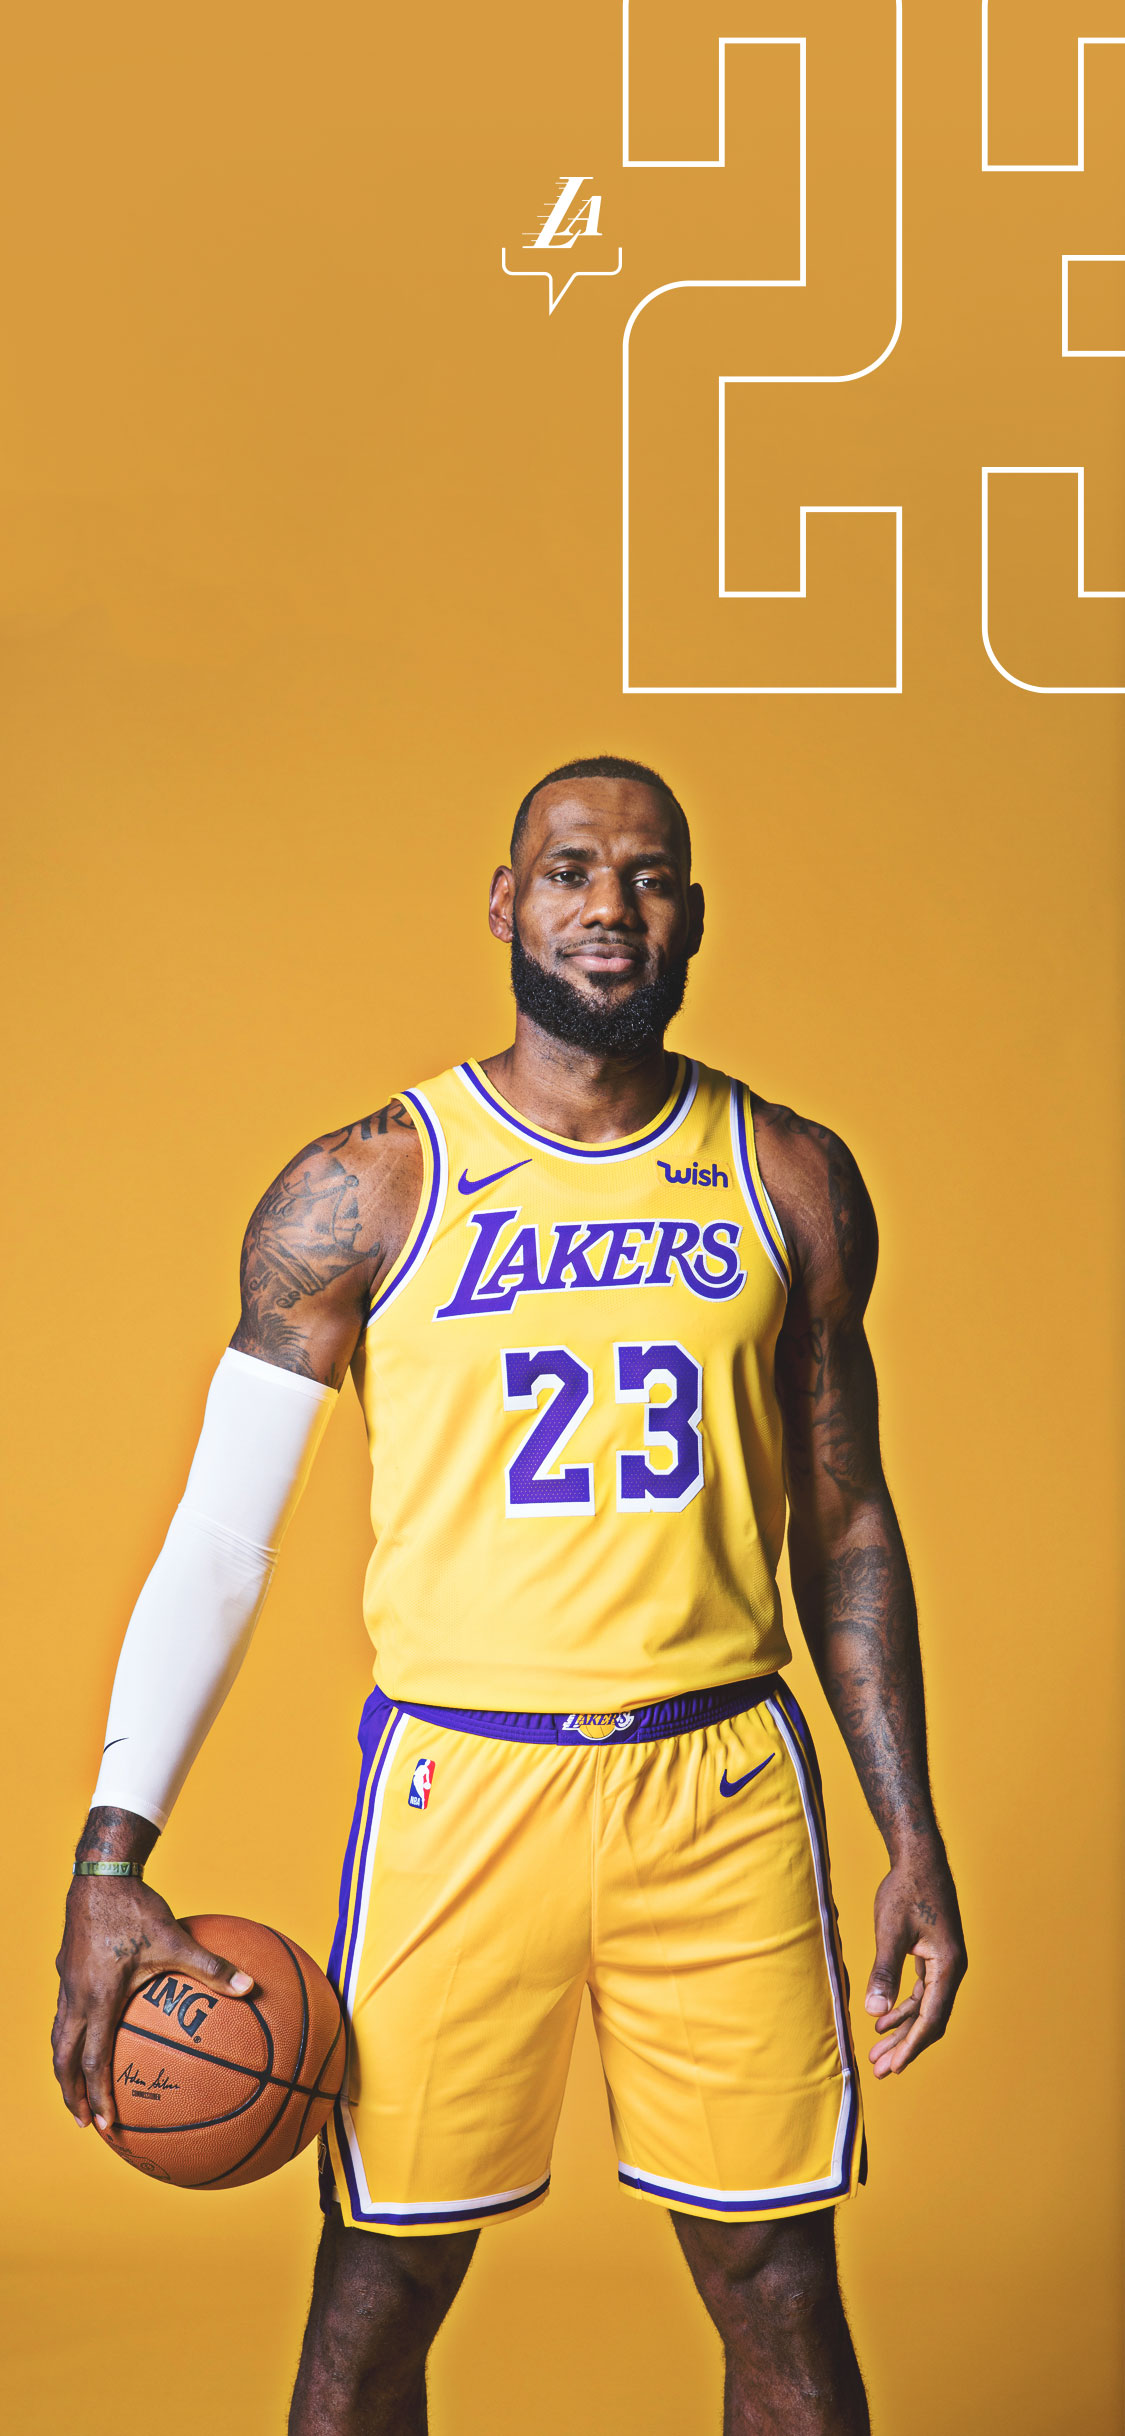 Lebron James Lakers Wallpapers Hd For Iphone And Desktop Visual Arts Ideas